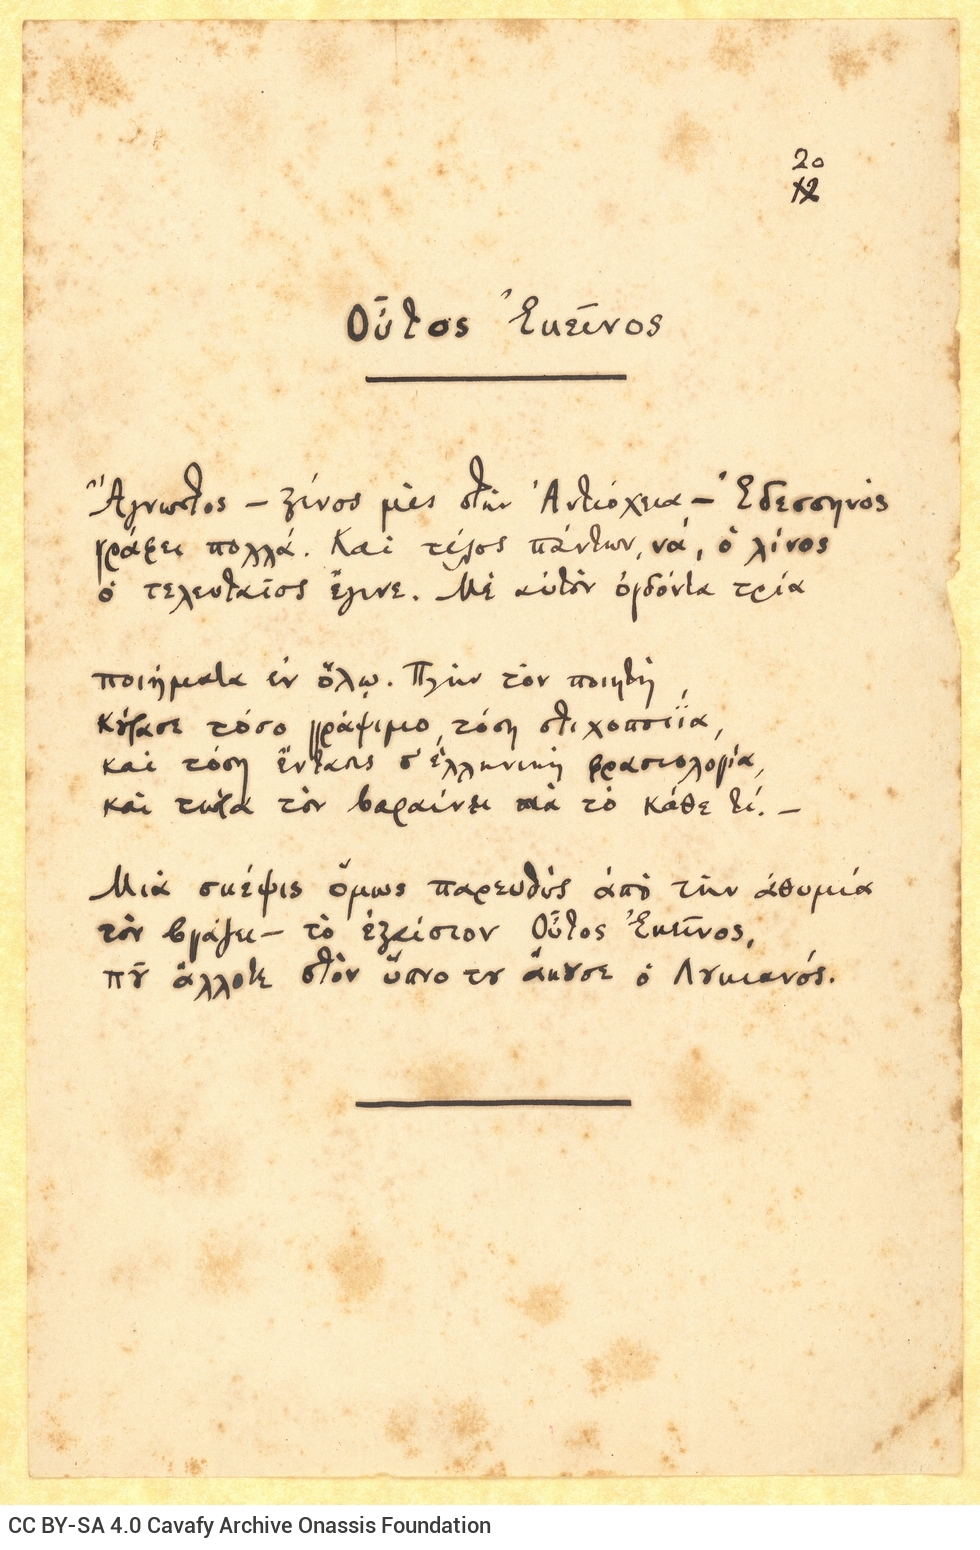 Manuscript of the poem "That Is He" on one side of a sheet. Number "20" at top right and the crossed out number "12" below